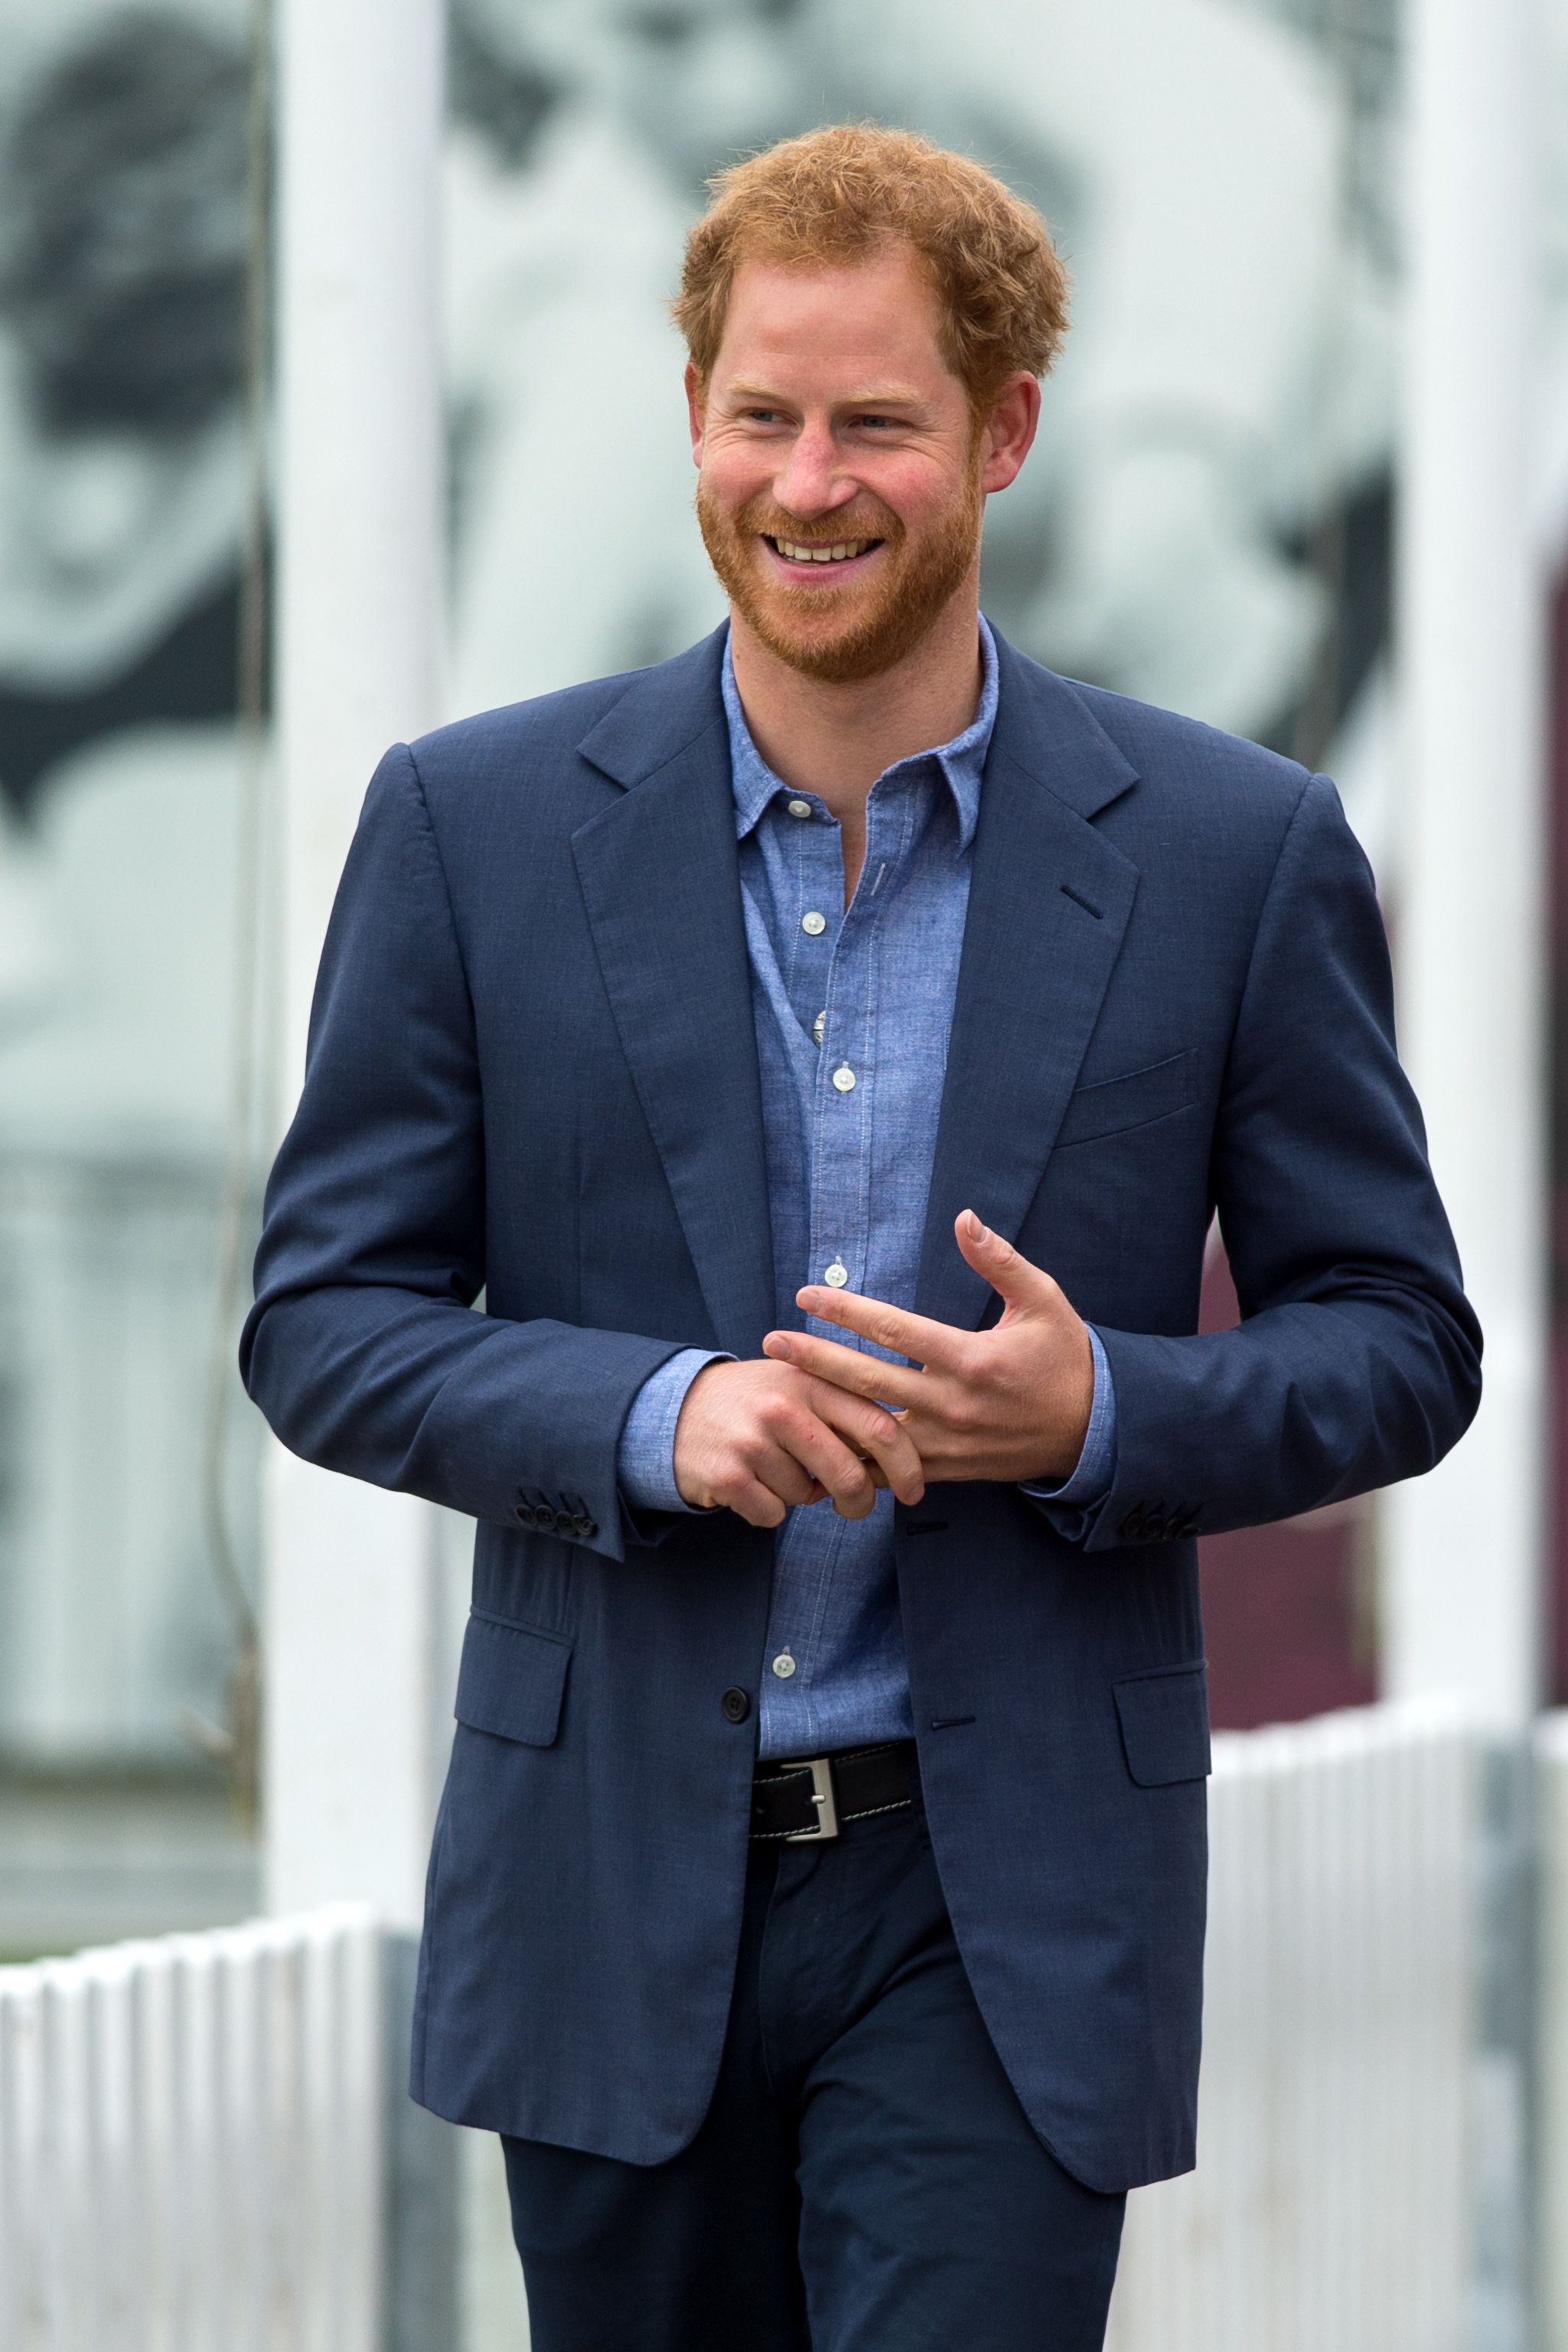 Prince Harry at a training session during a celebration for the expansion of Coach Core at Lord's Cricket Ground on October 7, 2016, in London, England | Photo: Ben A. Pruchnie/Getty Images